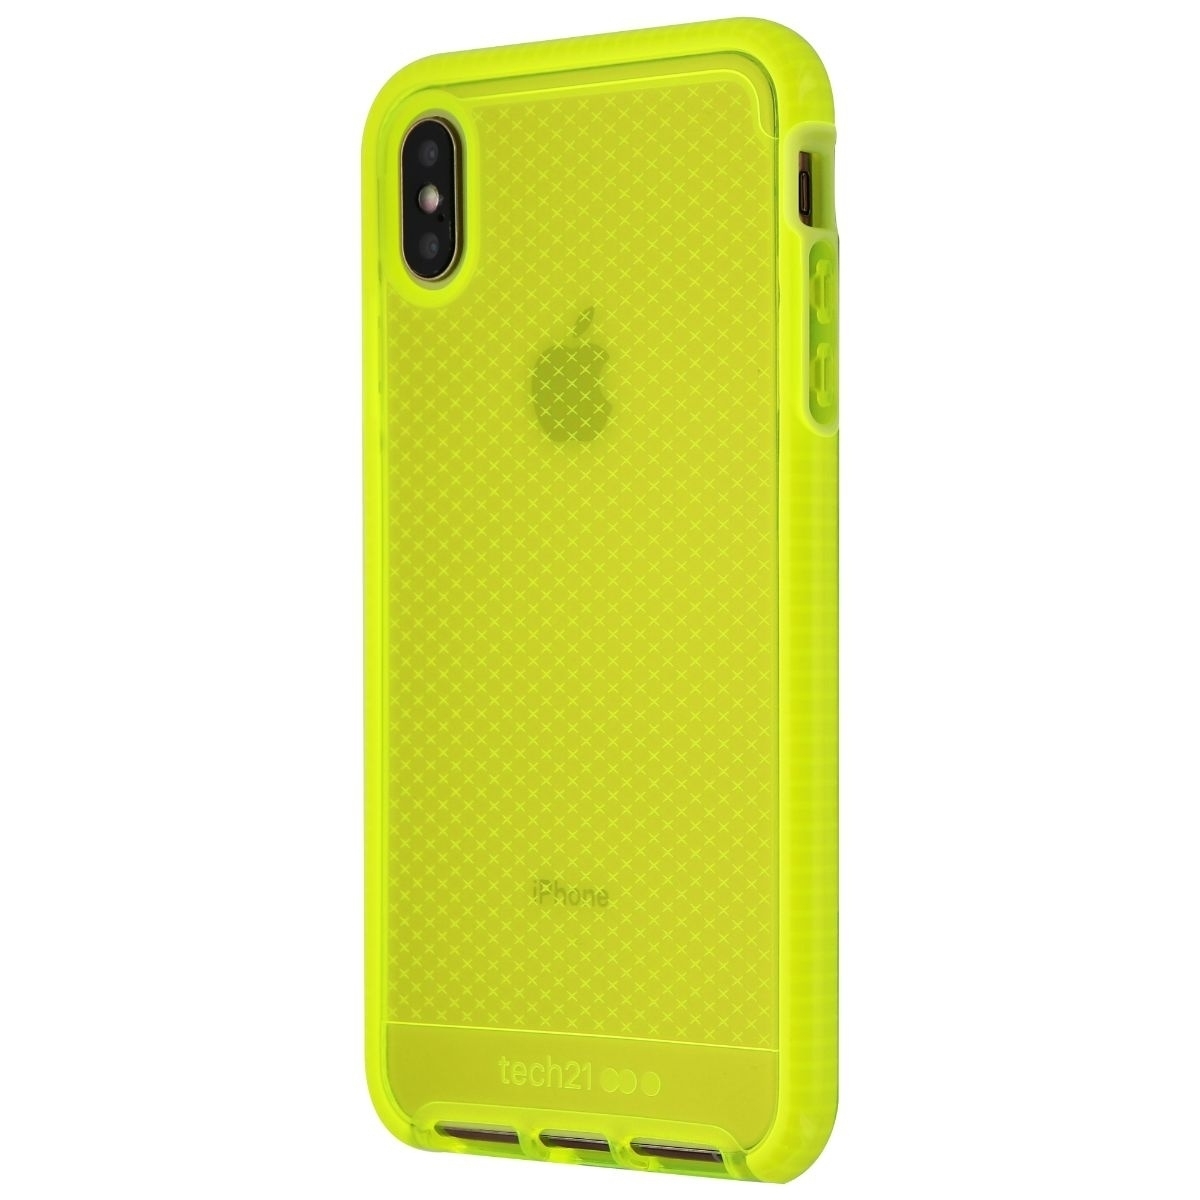 Tech21 Evo Check Series Gel Case For Apple IPhone XS Max - Neon Yellow